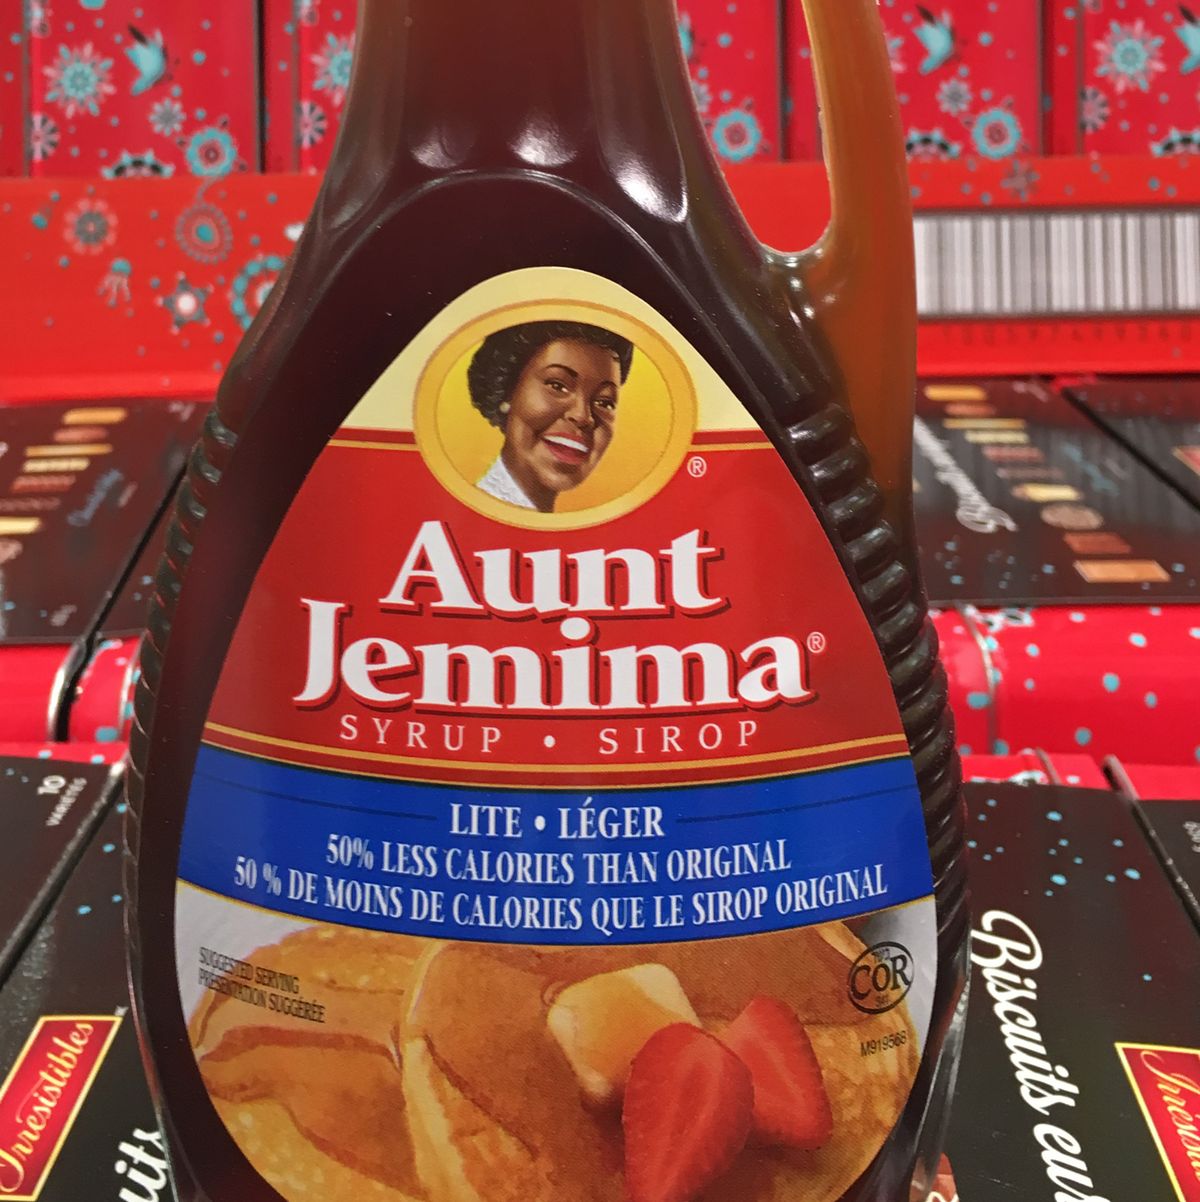 aunt jemima syrup label in bottle aunt jemima is a brand of